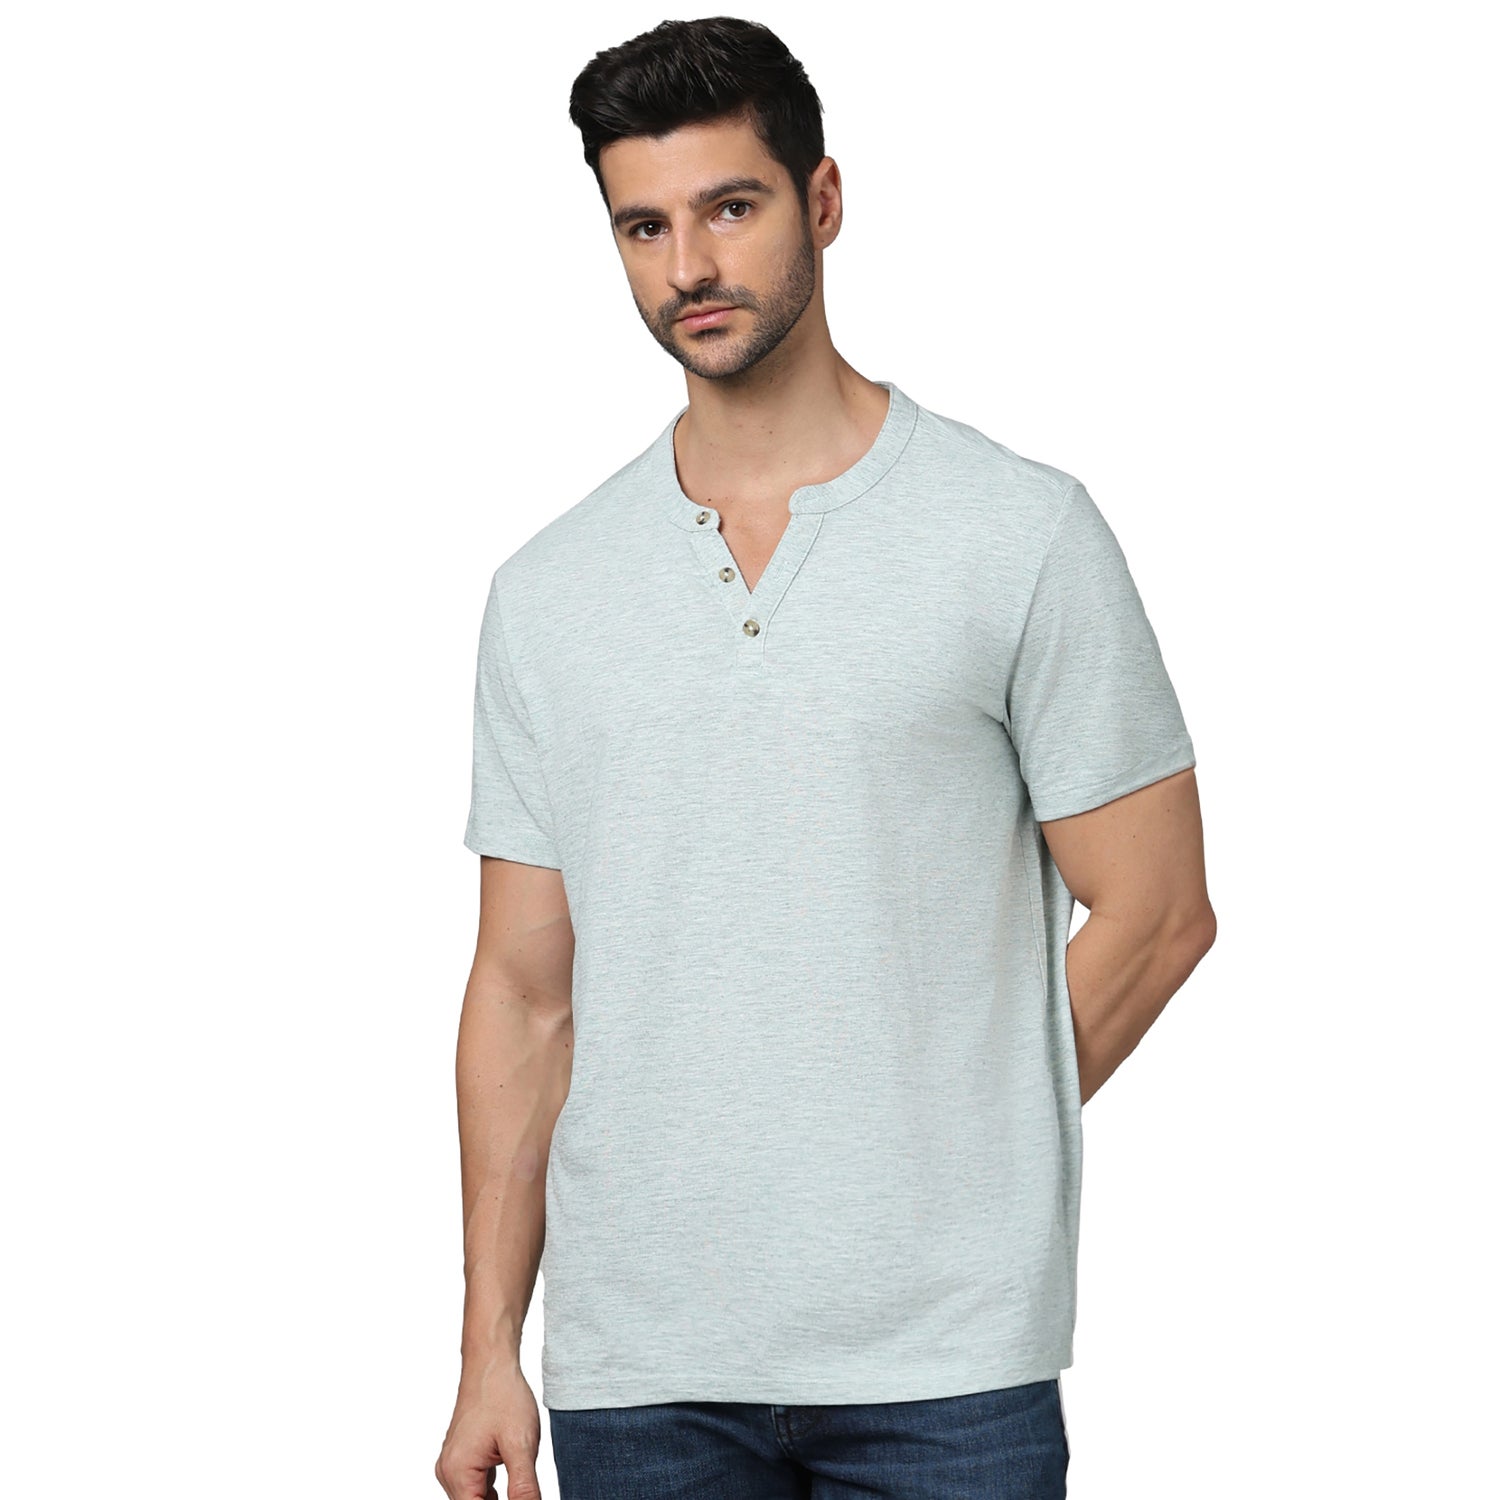 Men's Green Henley Neck Solid Regular Fit Cotton Casual Tshirts (CEGETI2)